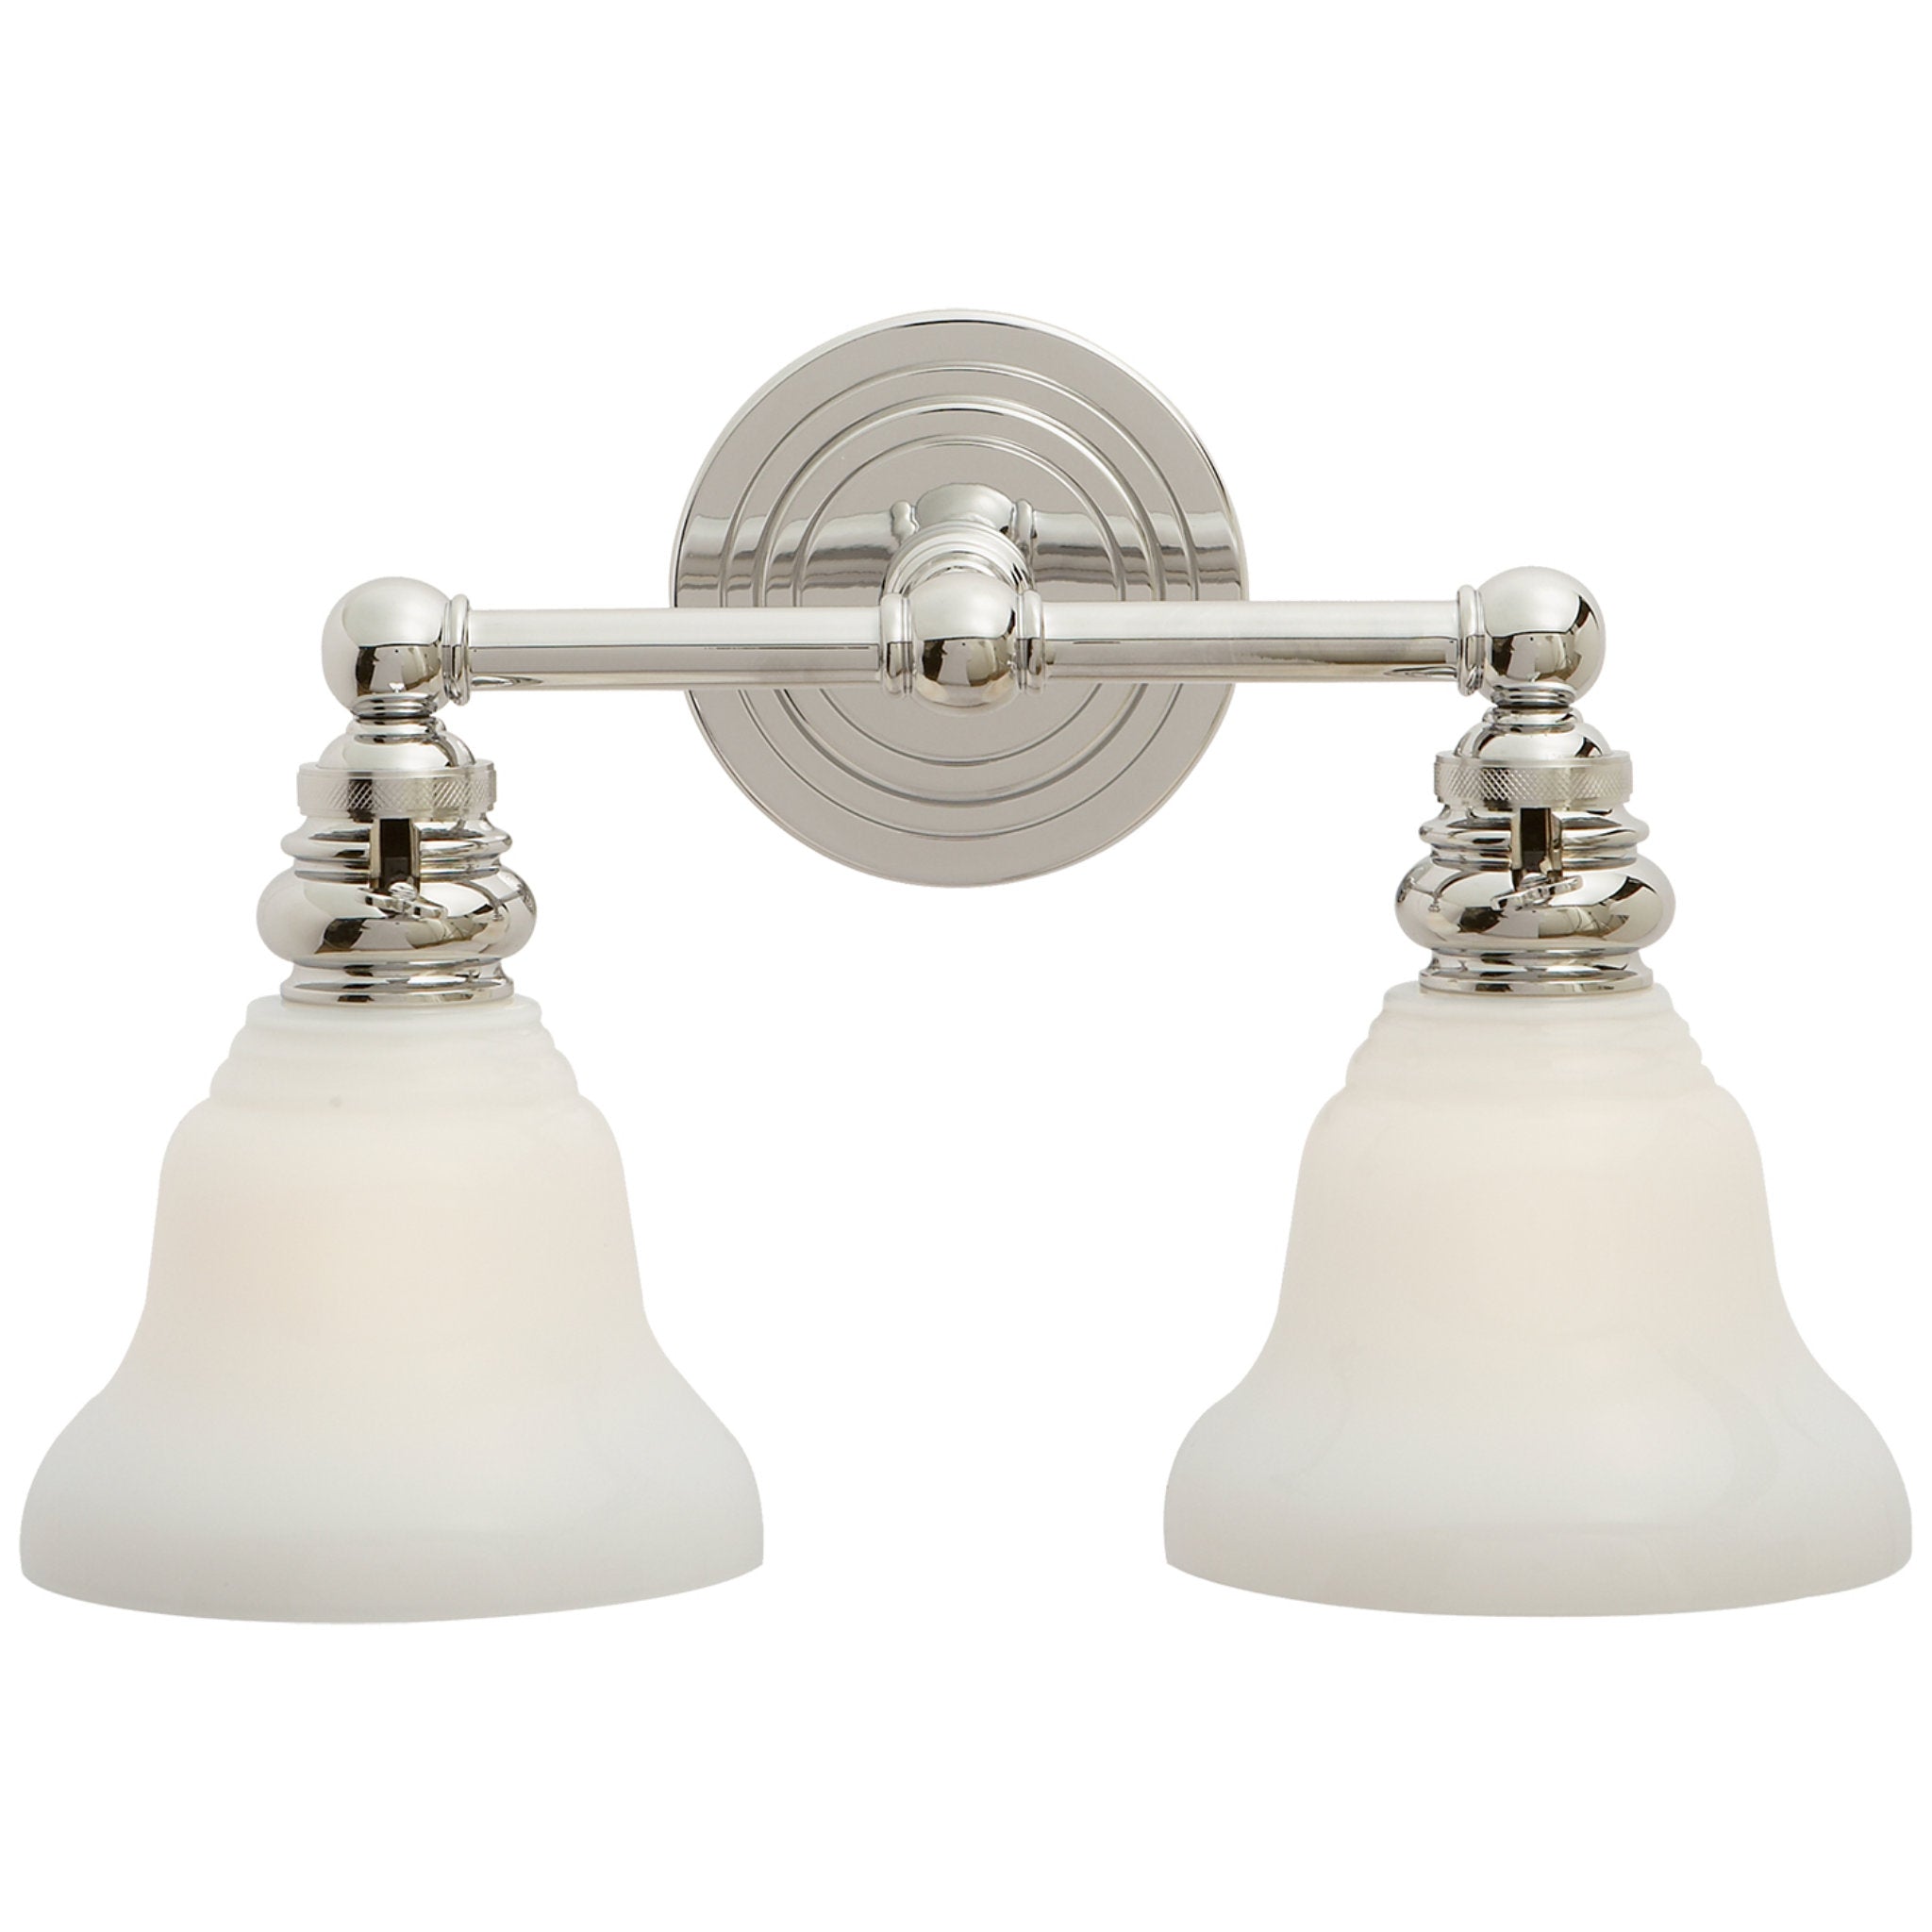 Chapman & Myers Boston Functional Double Light in Polished Nickel with White Glass